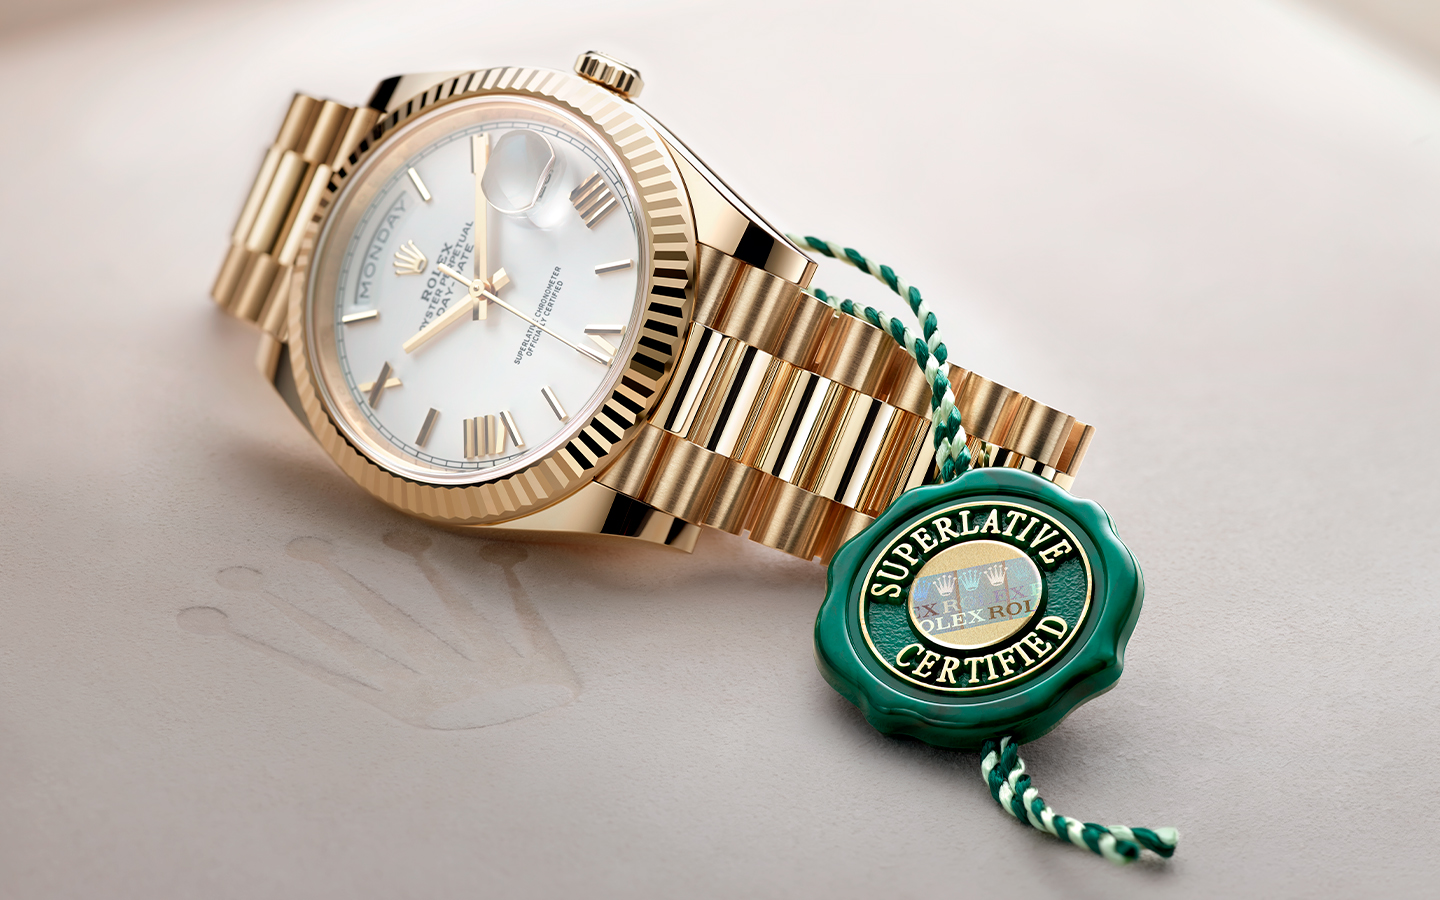 A VOYAGE INTO THE WORLD OF ROLEX